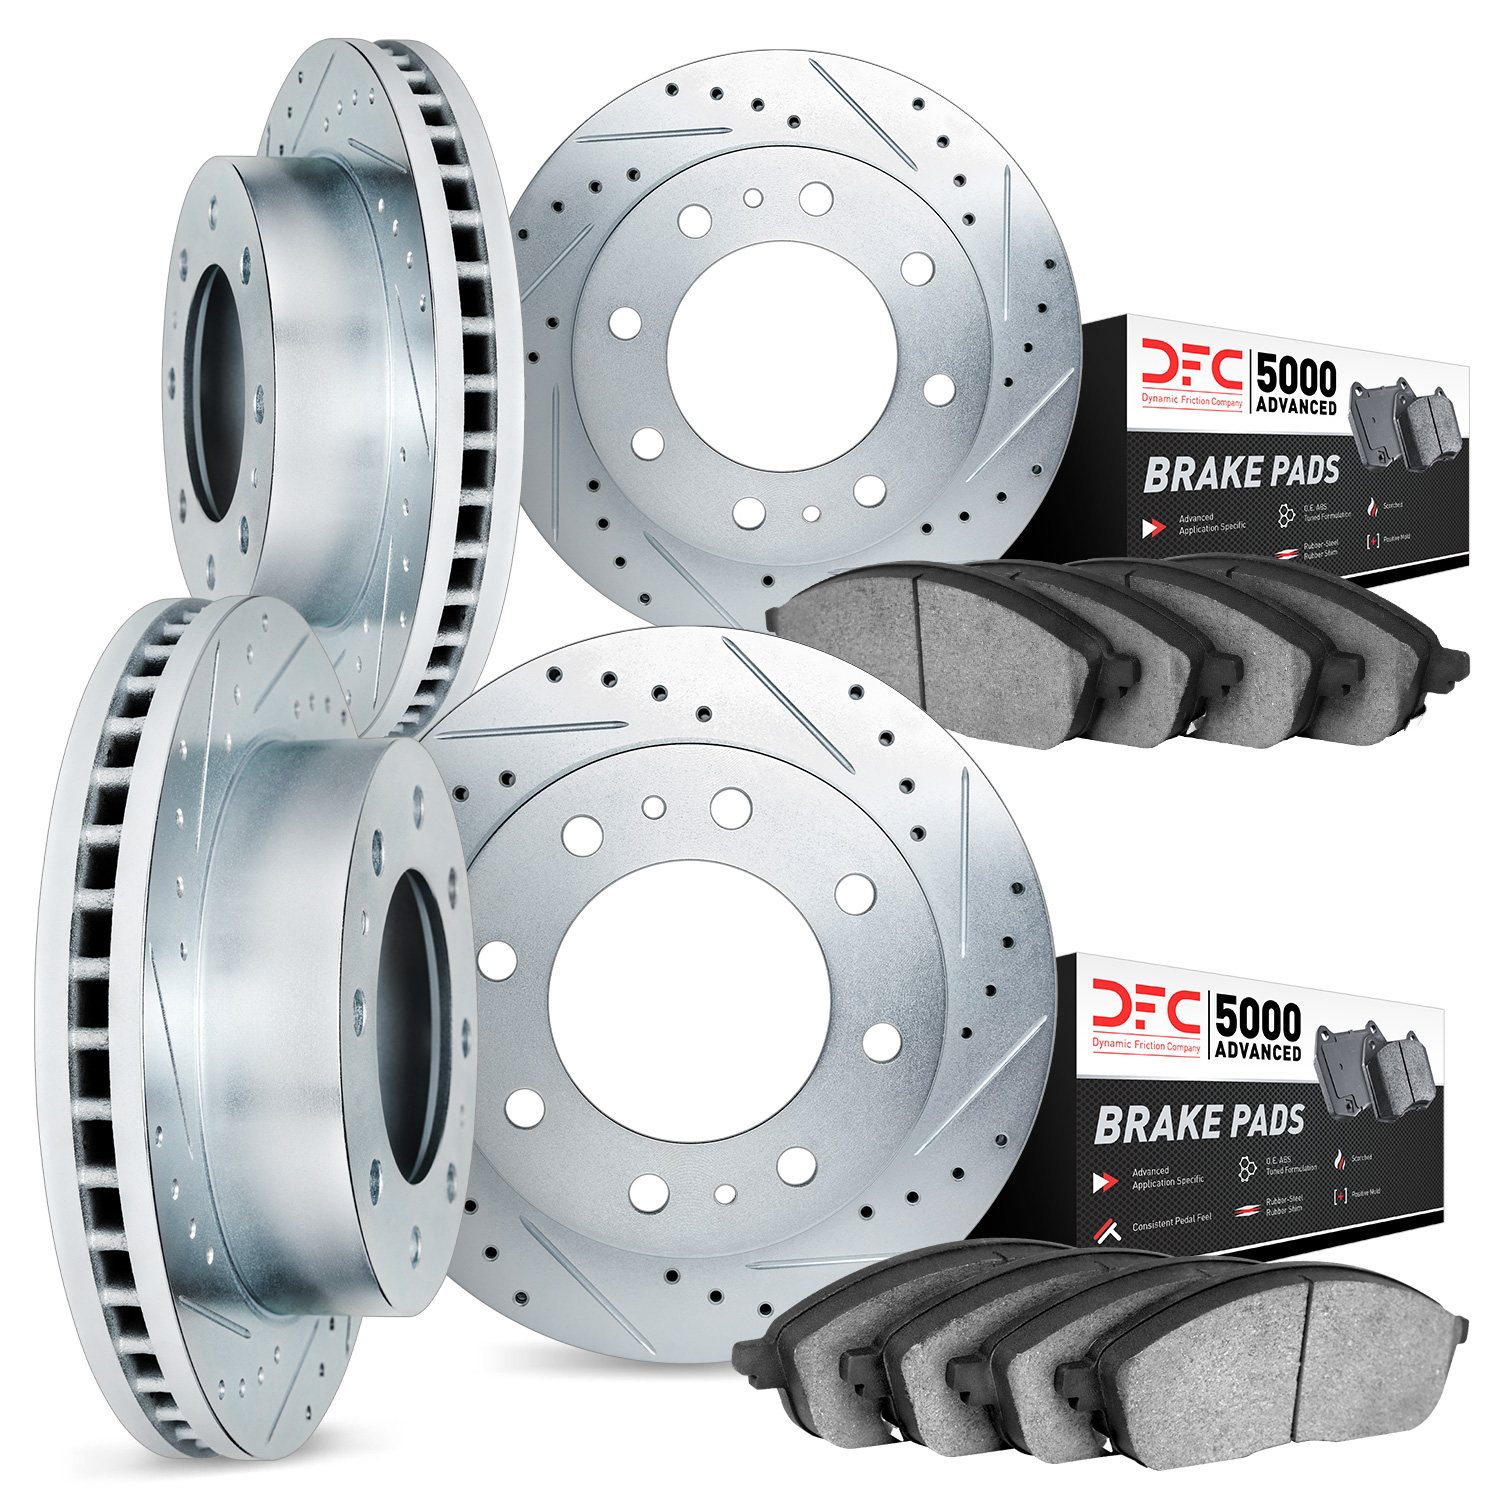 7504-54363 Drilled/Slotted Brake Rotors w/5000 Advanced Brake Pads Kit [Silver], 2005-2007 Ford/Lincoln/Mercury/Mazda, Position: